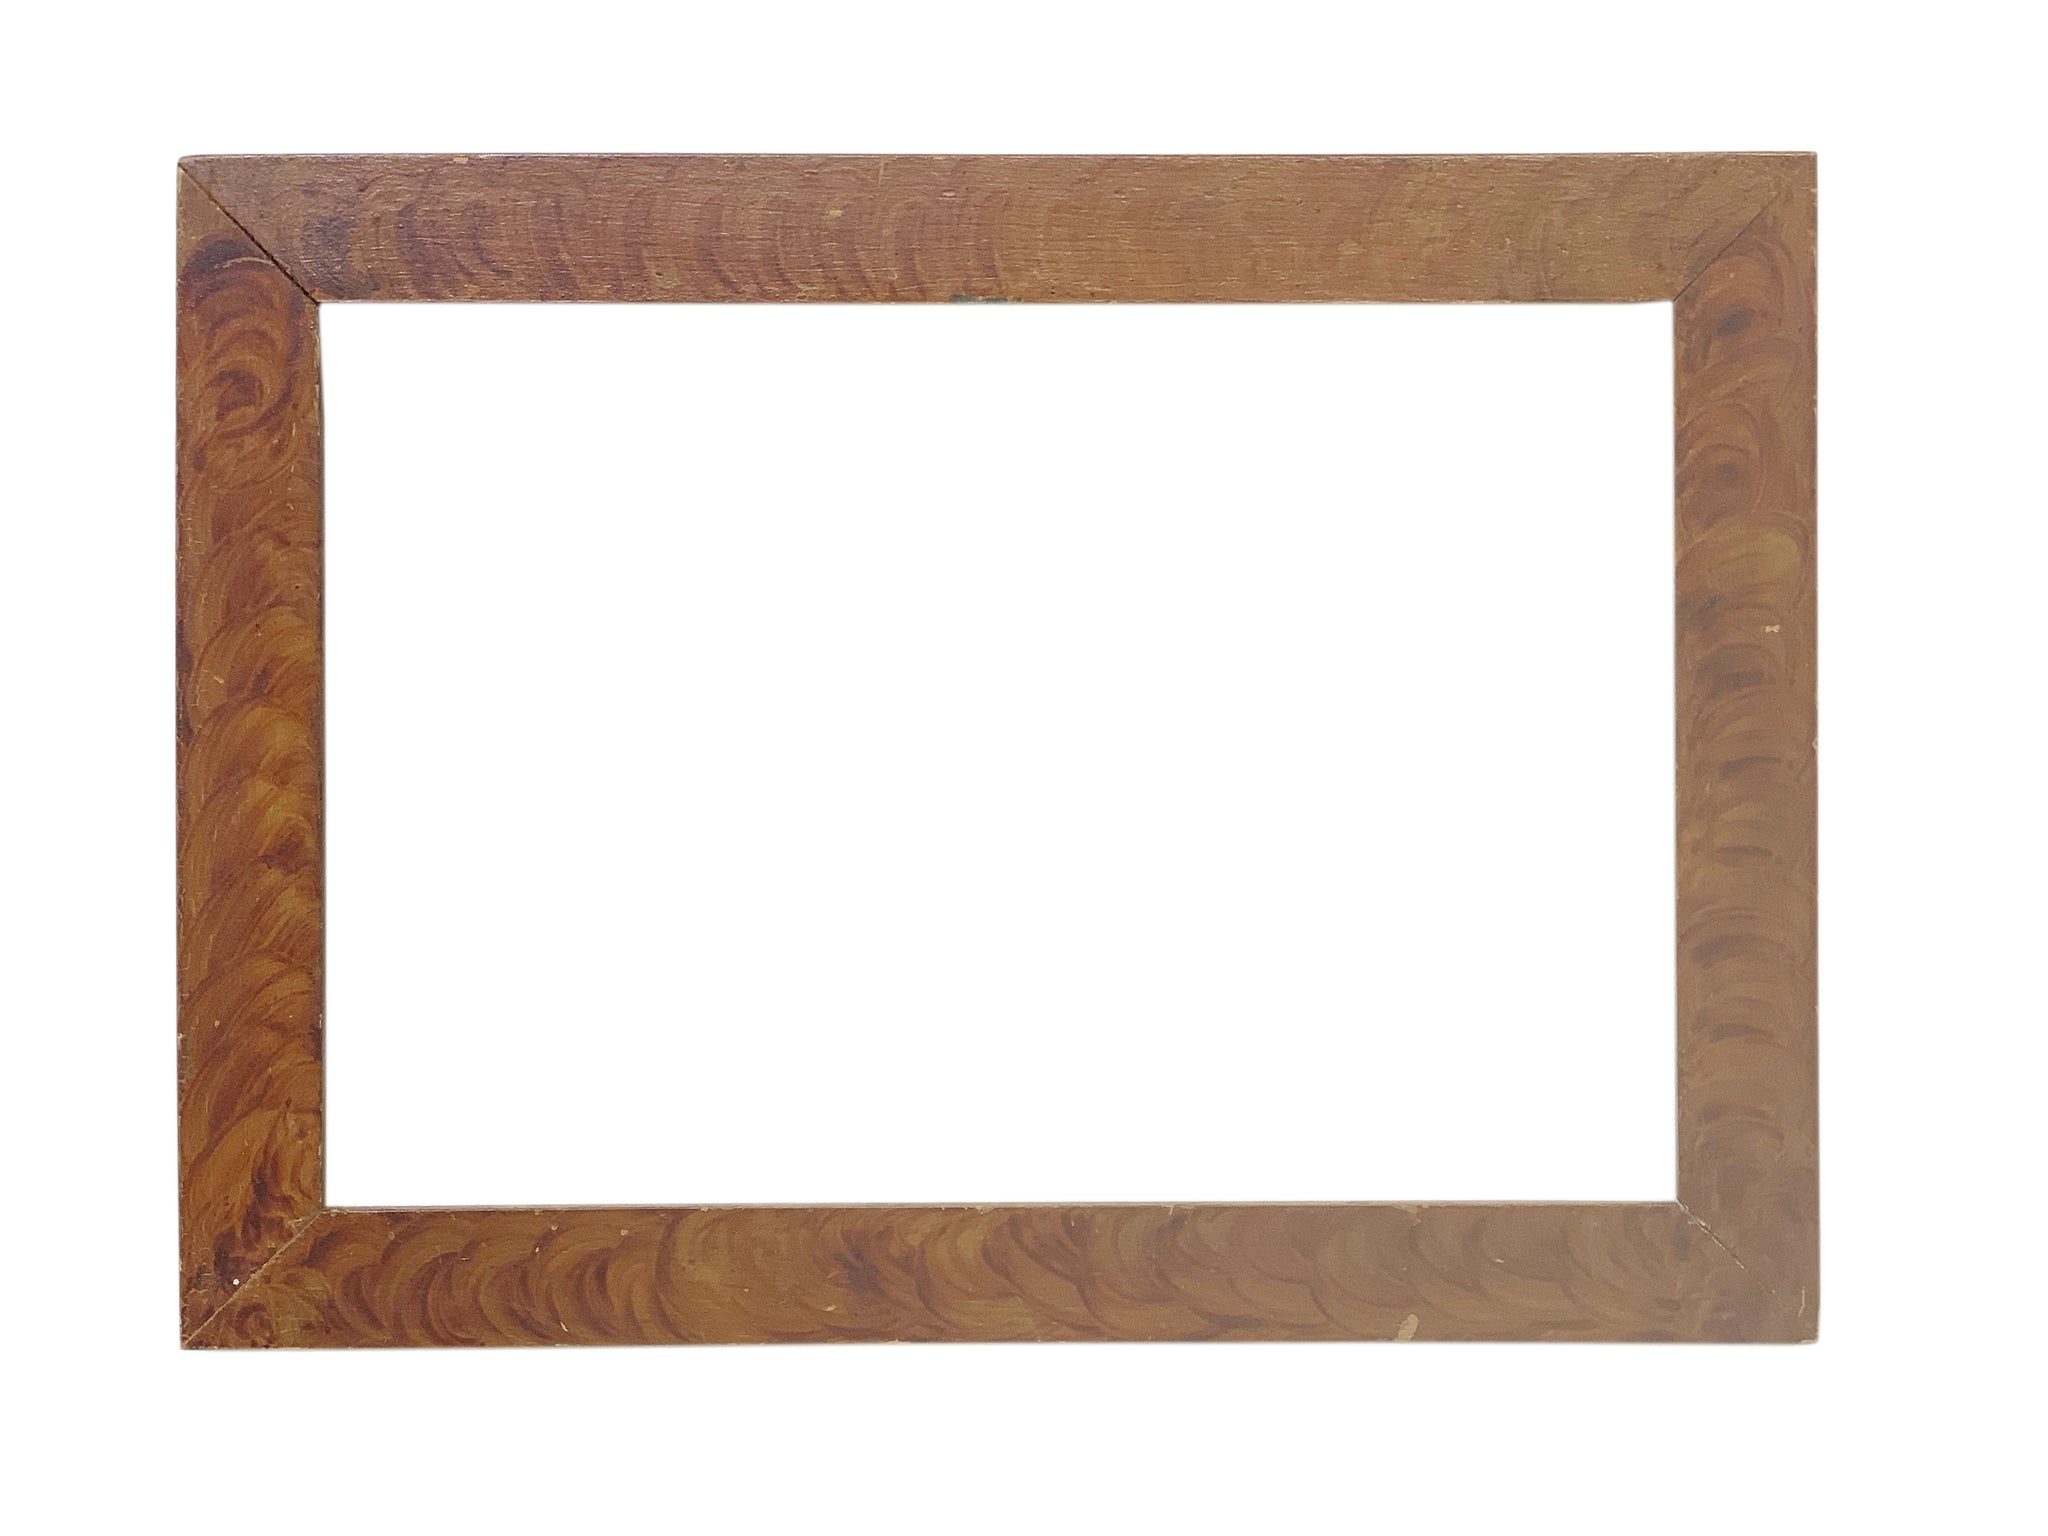 American 9x14 inch Antique Brown Folk Art Picture Frame for canvas art circa 1800s (19th century).